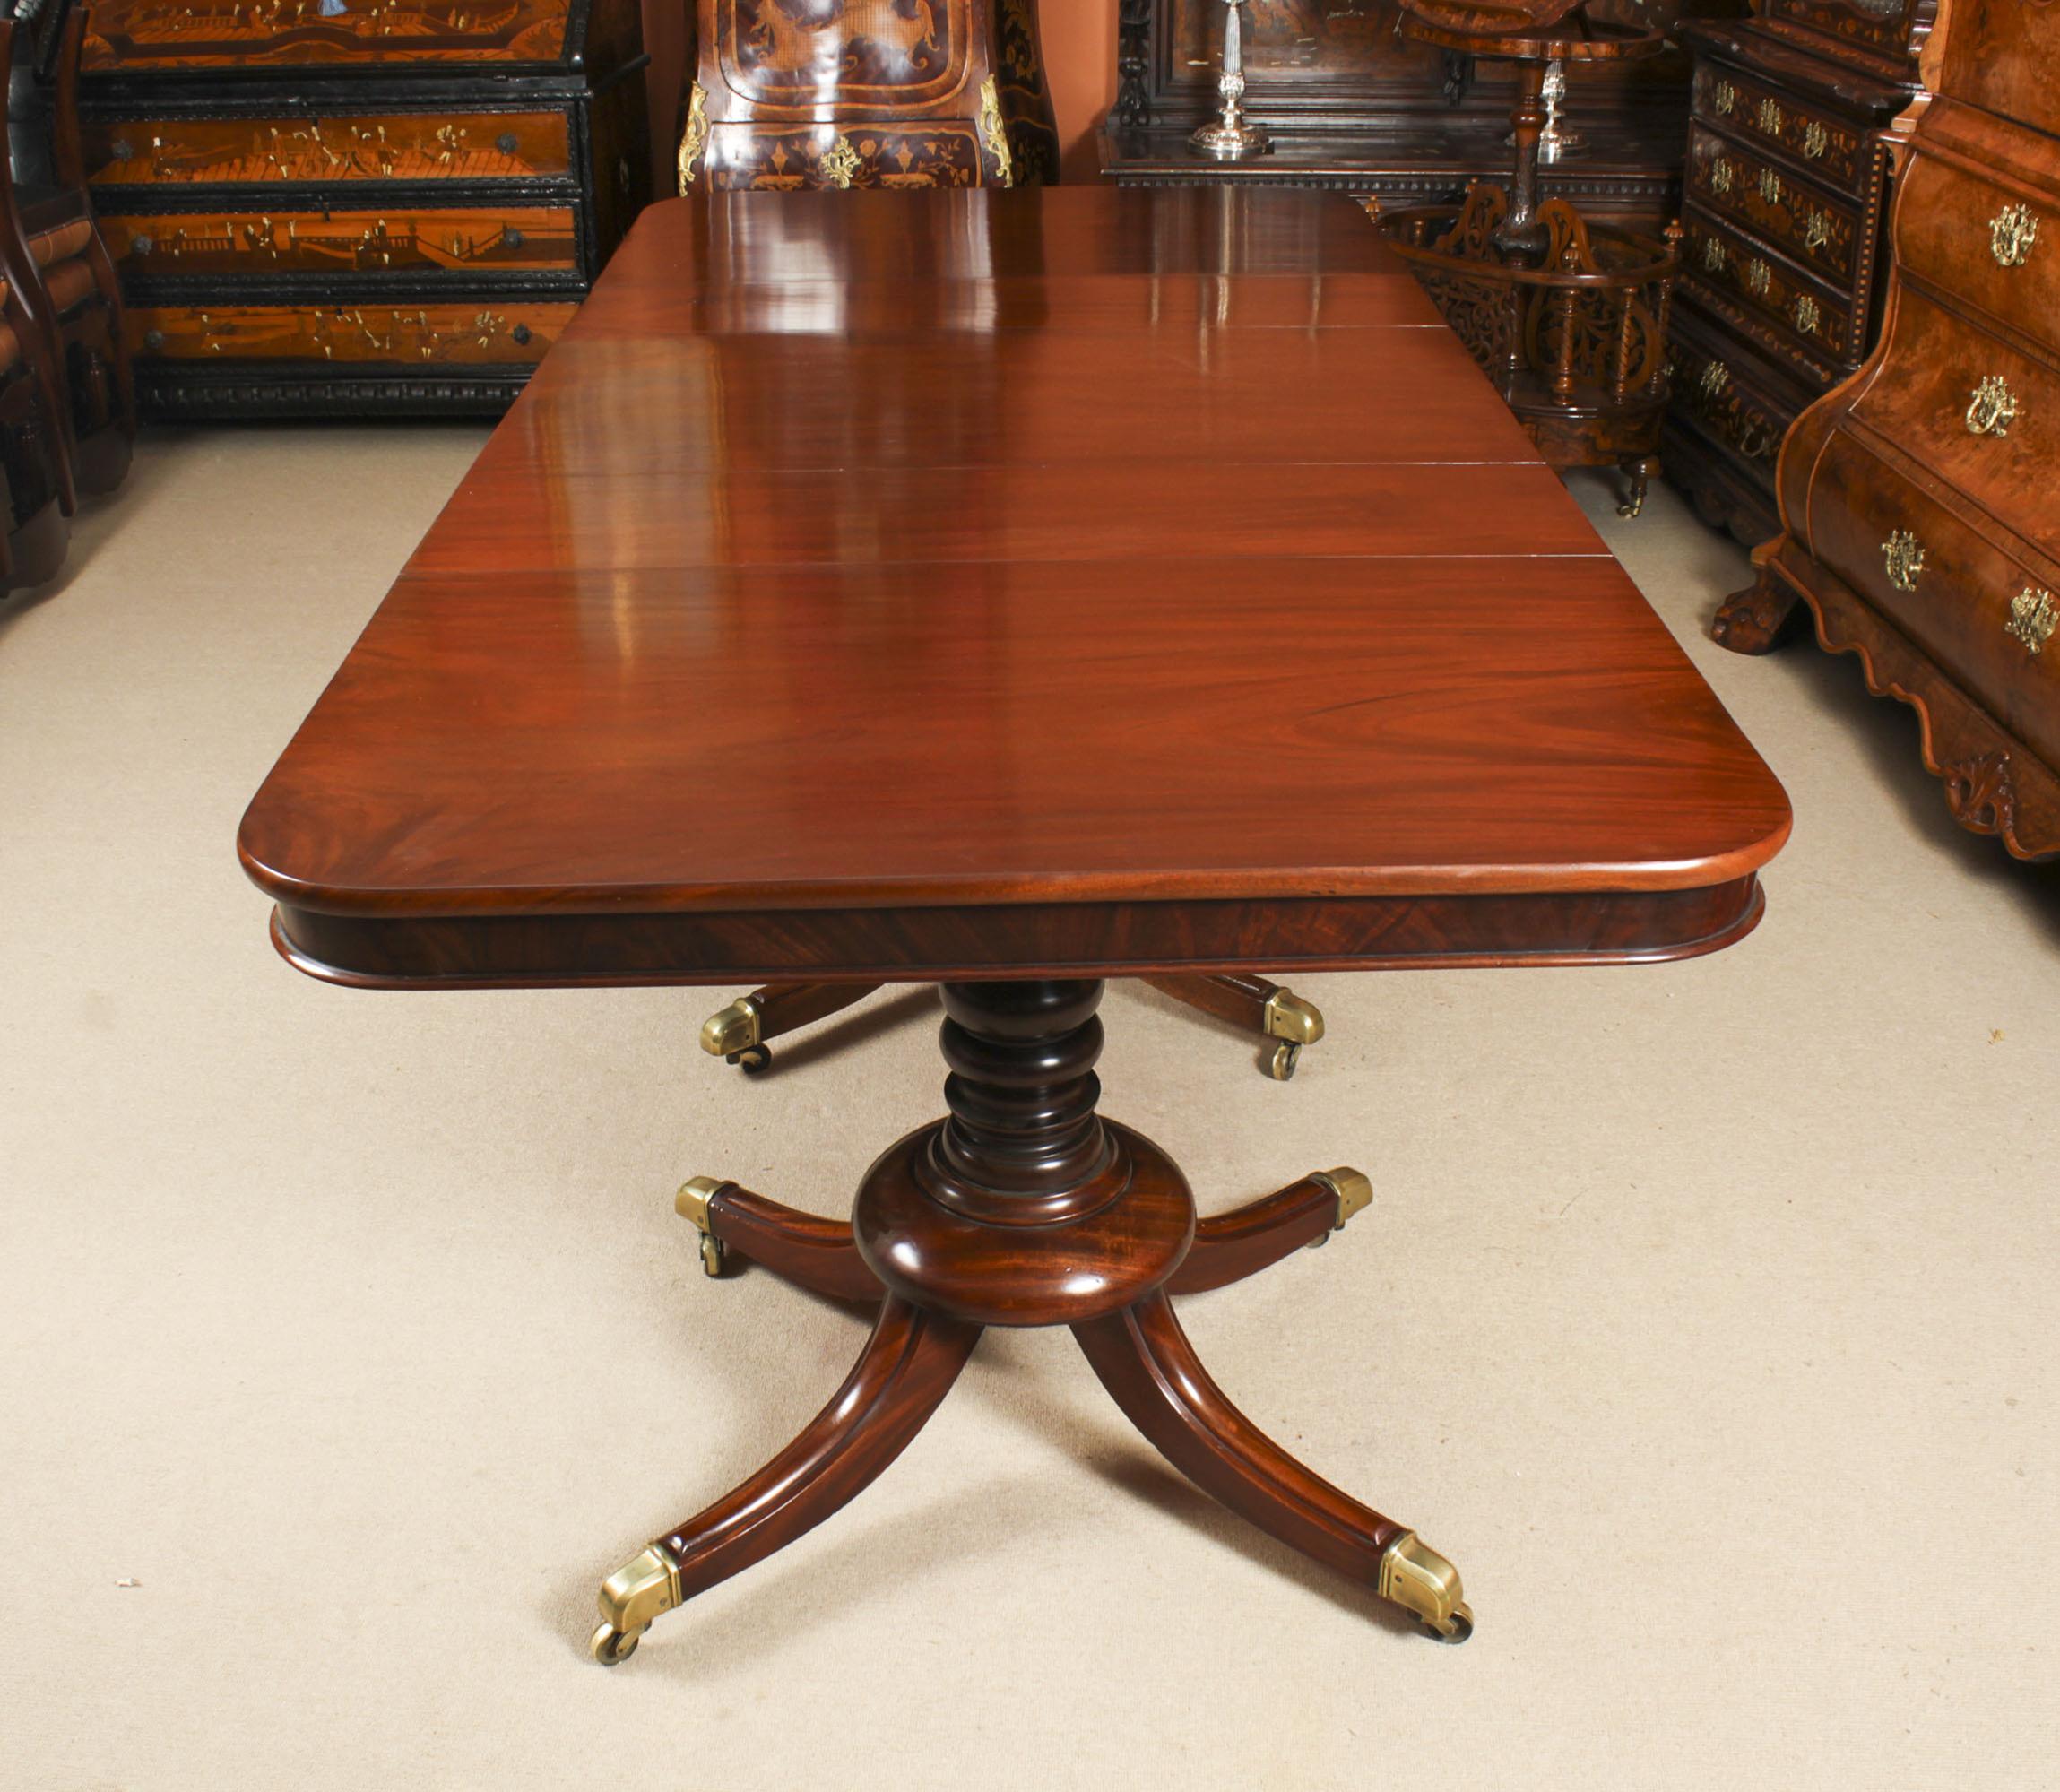 Antique 8ft Regency Metamorphic 3 Pillar Dining Table, 19th Century In Good Condition For Sale In London, GB